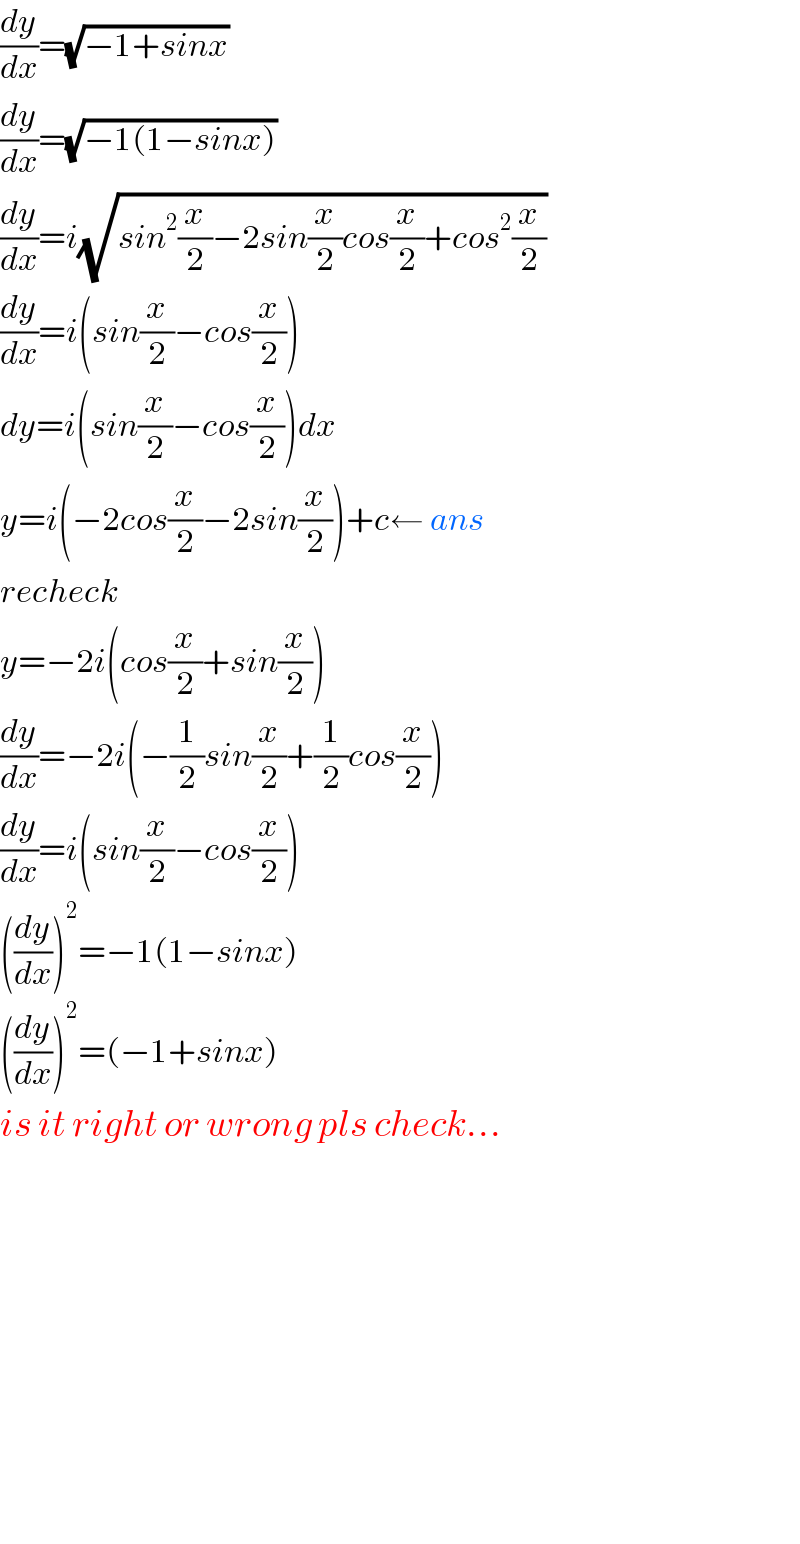 (dy/dx)=(√(−1+sinx))   (dy/dx)=(√(−1(1−sinx)))   (dy/dx)=i(√(sin^2 (x/2)−2sin(x/2)cos(x/2)+cos^2 (x/2)))  (dy/dx)=i(sin(x/2)−cos(x/2))    dy=i(sin(x/2)−cos(x/2))dx  y=i(−2cos(x/2)−2sin(x/2))+c← ans  recheck  y=−2i(cos(x/2)+sin(x/2))  (dy/dx)=−2i(−(1/2)sin(x/2)+(1/2)cos(x/2))  (dy/dx)=i(sin(x/2)−cos(x/2))  ((dy/dx))^2 =−1(1−sinx)  ((dy/dx))^2 =(−1+sinx)  is it right or wrong pls check...                  